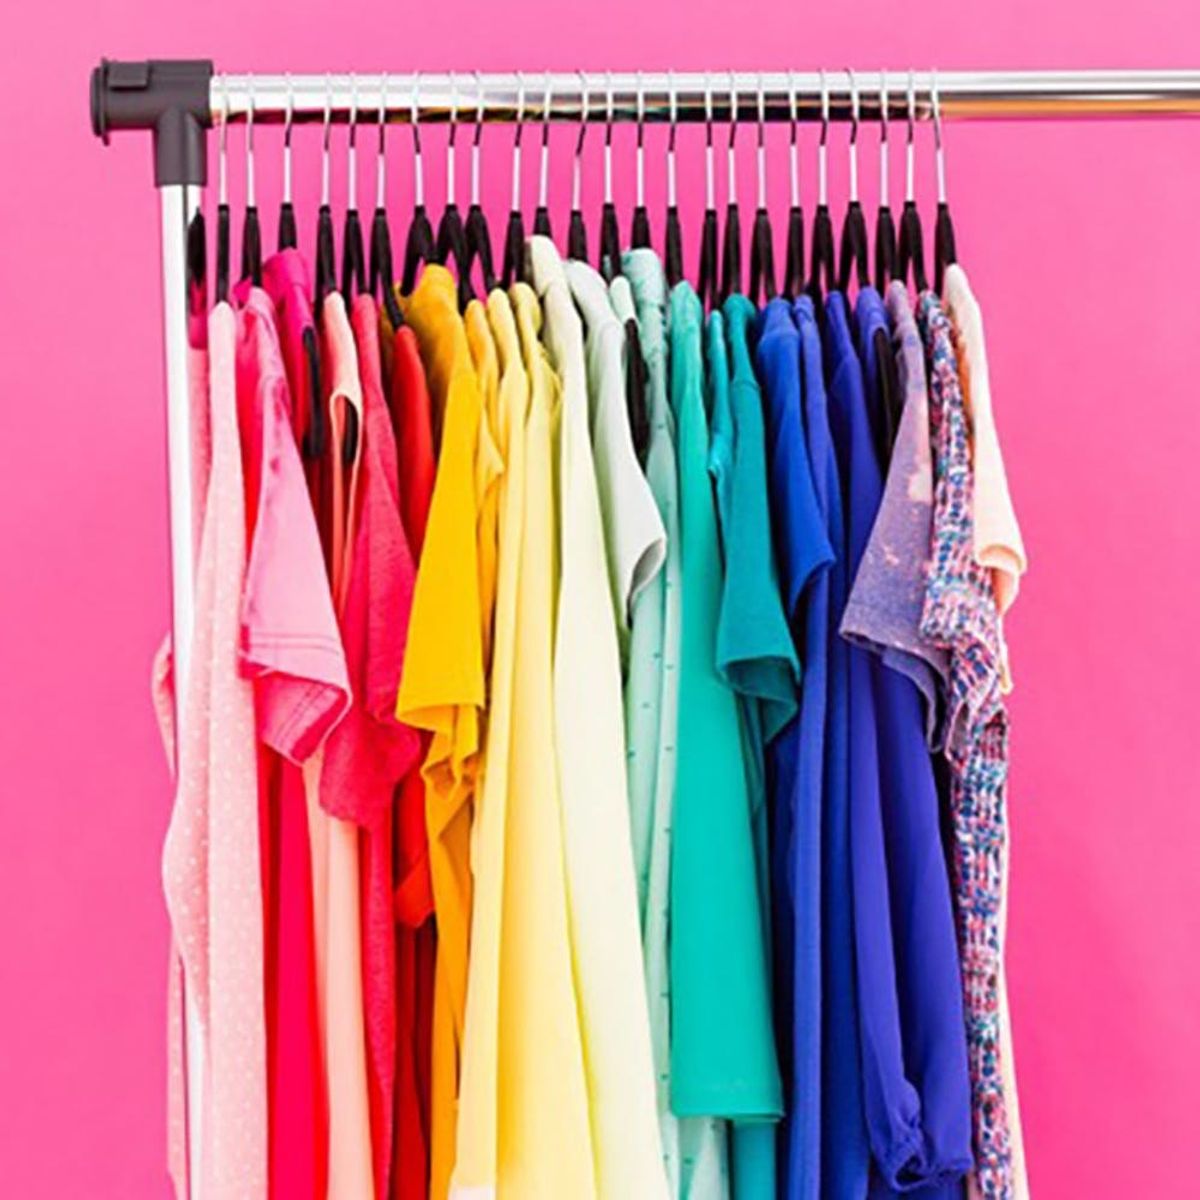 You Have to See This Woman’s Insane Dream Closet to Believe It